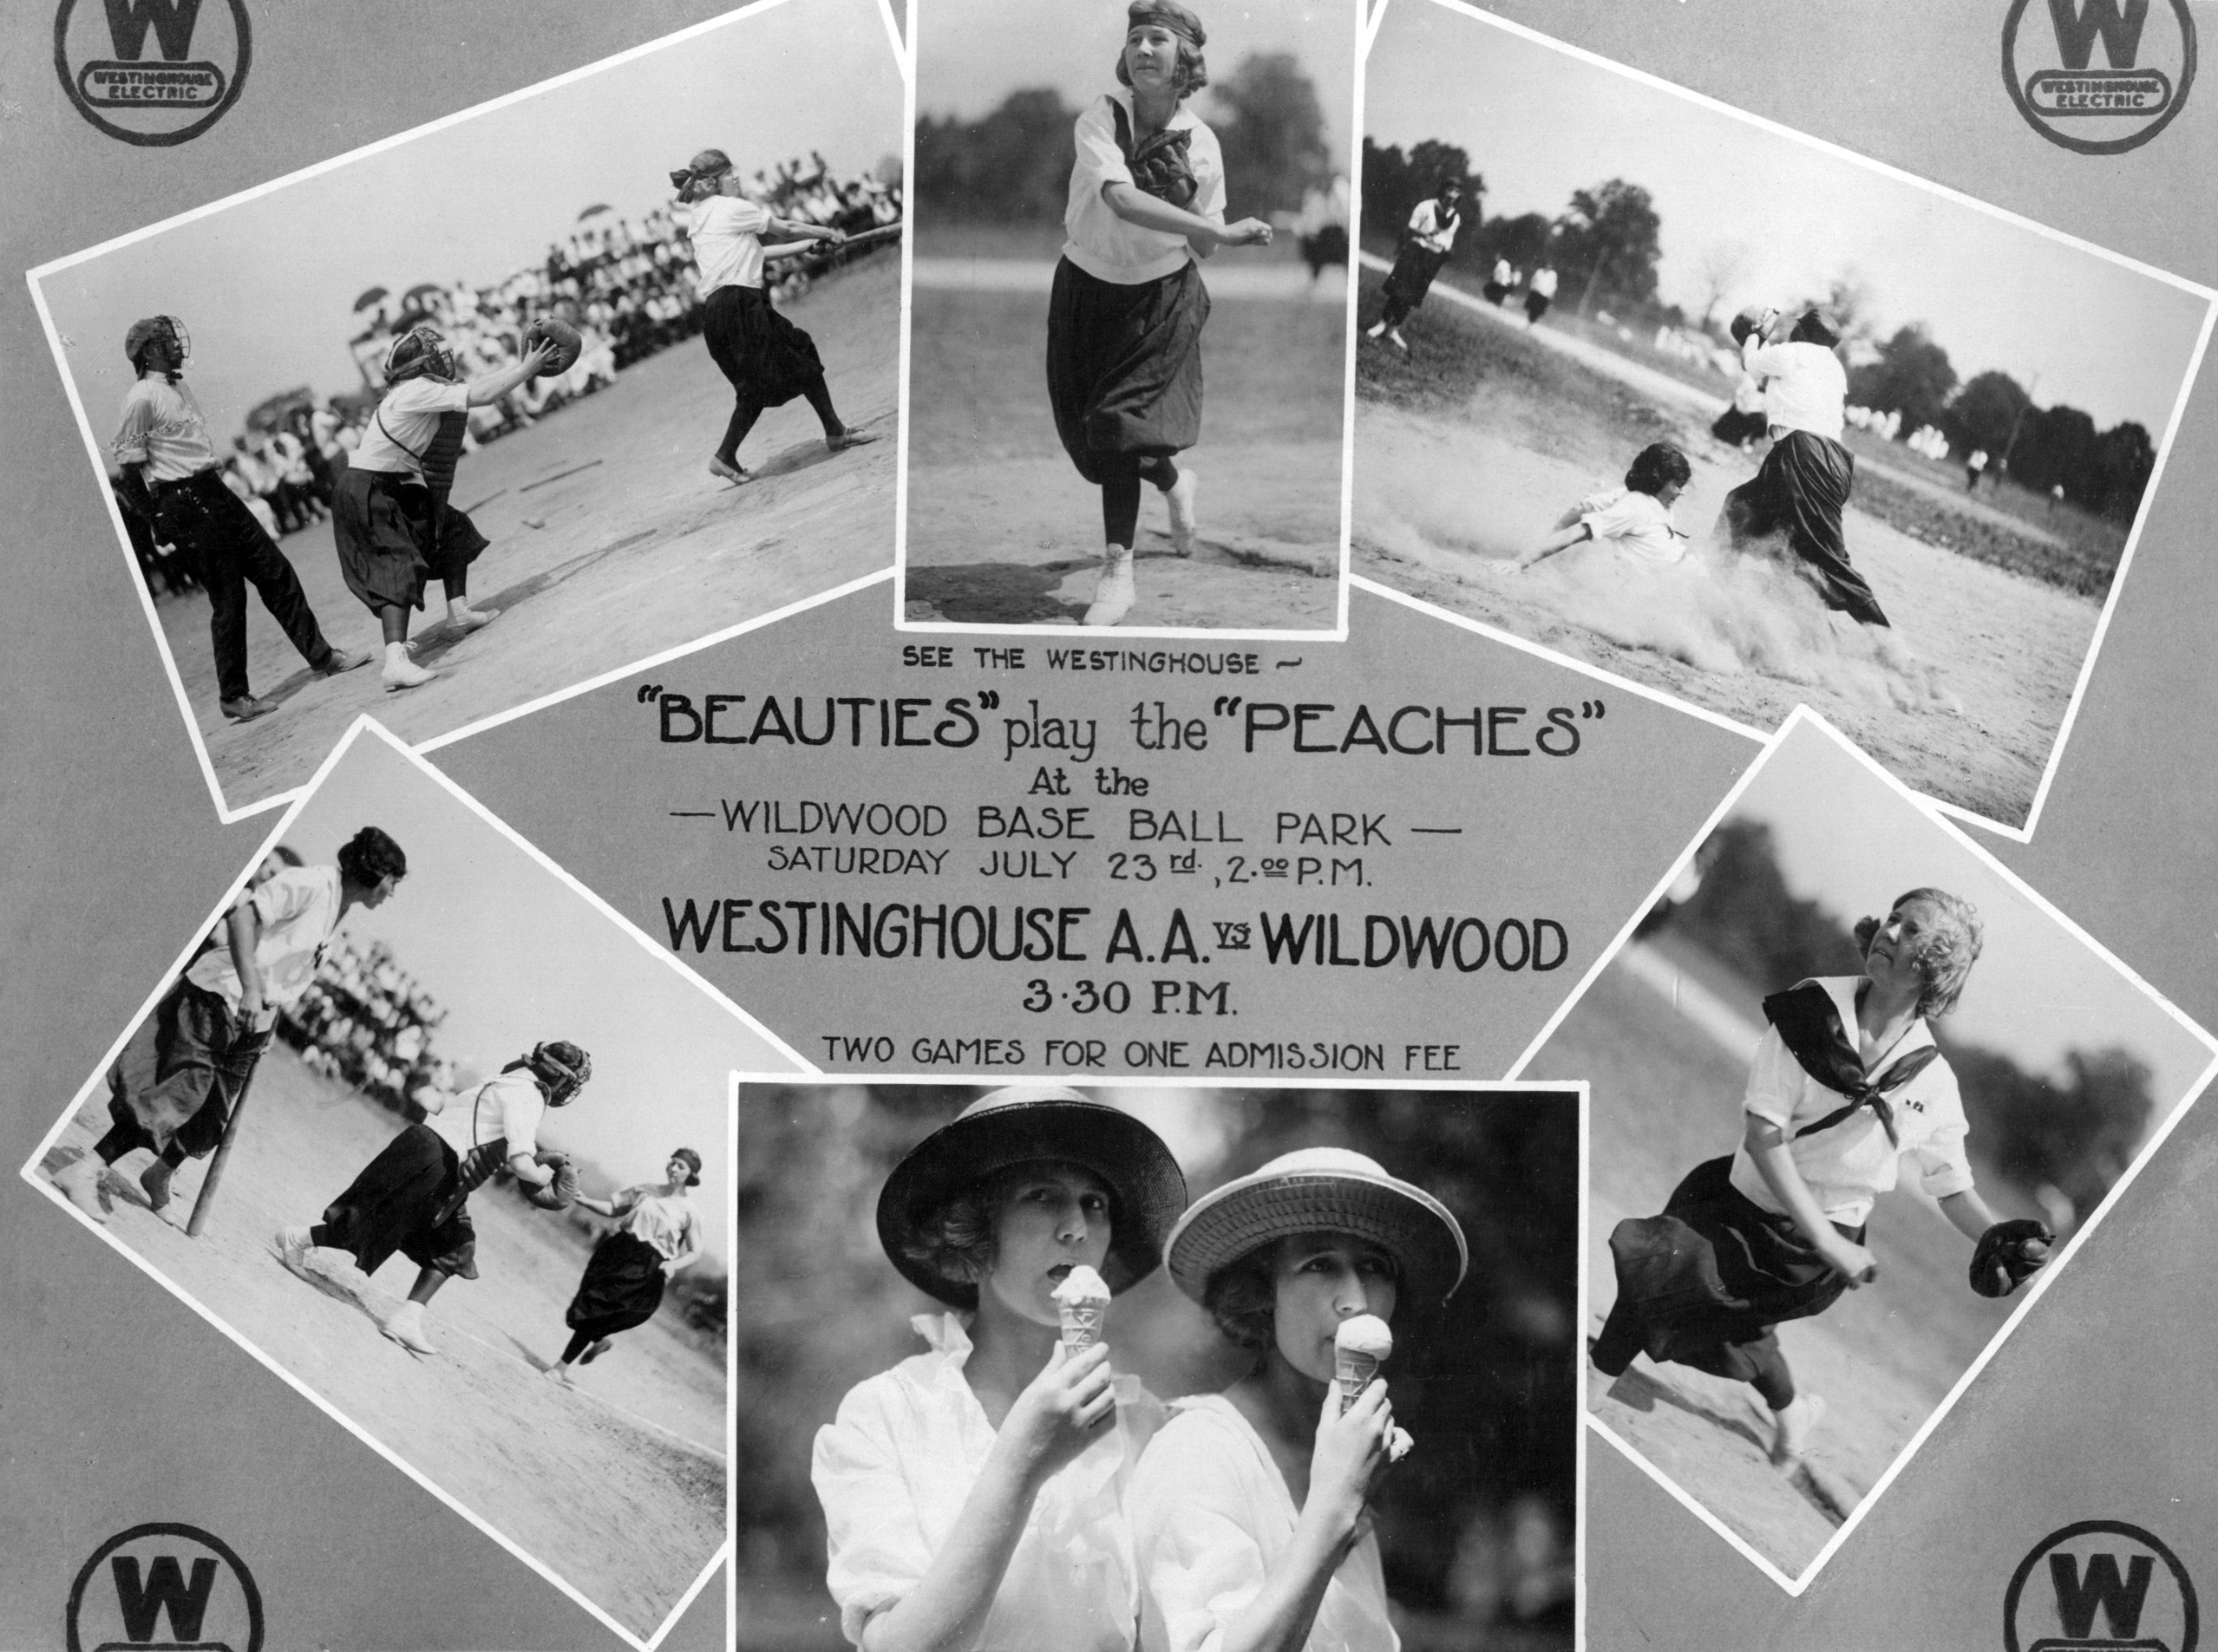 Photocollage advertising a women's baseball game played by employees of the Westinghouse company.